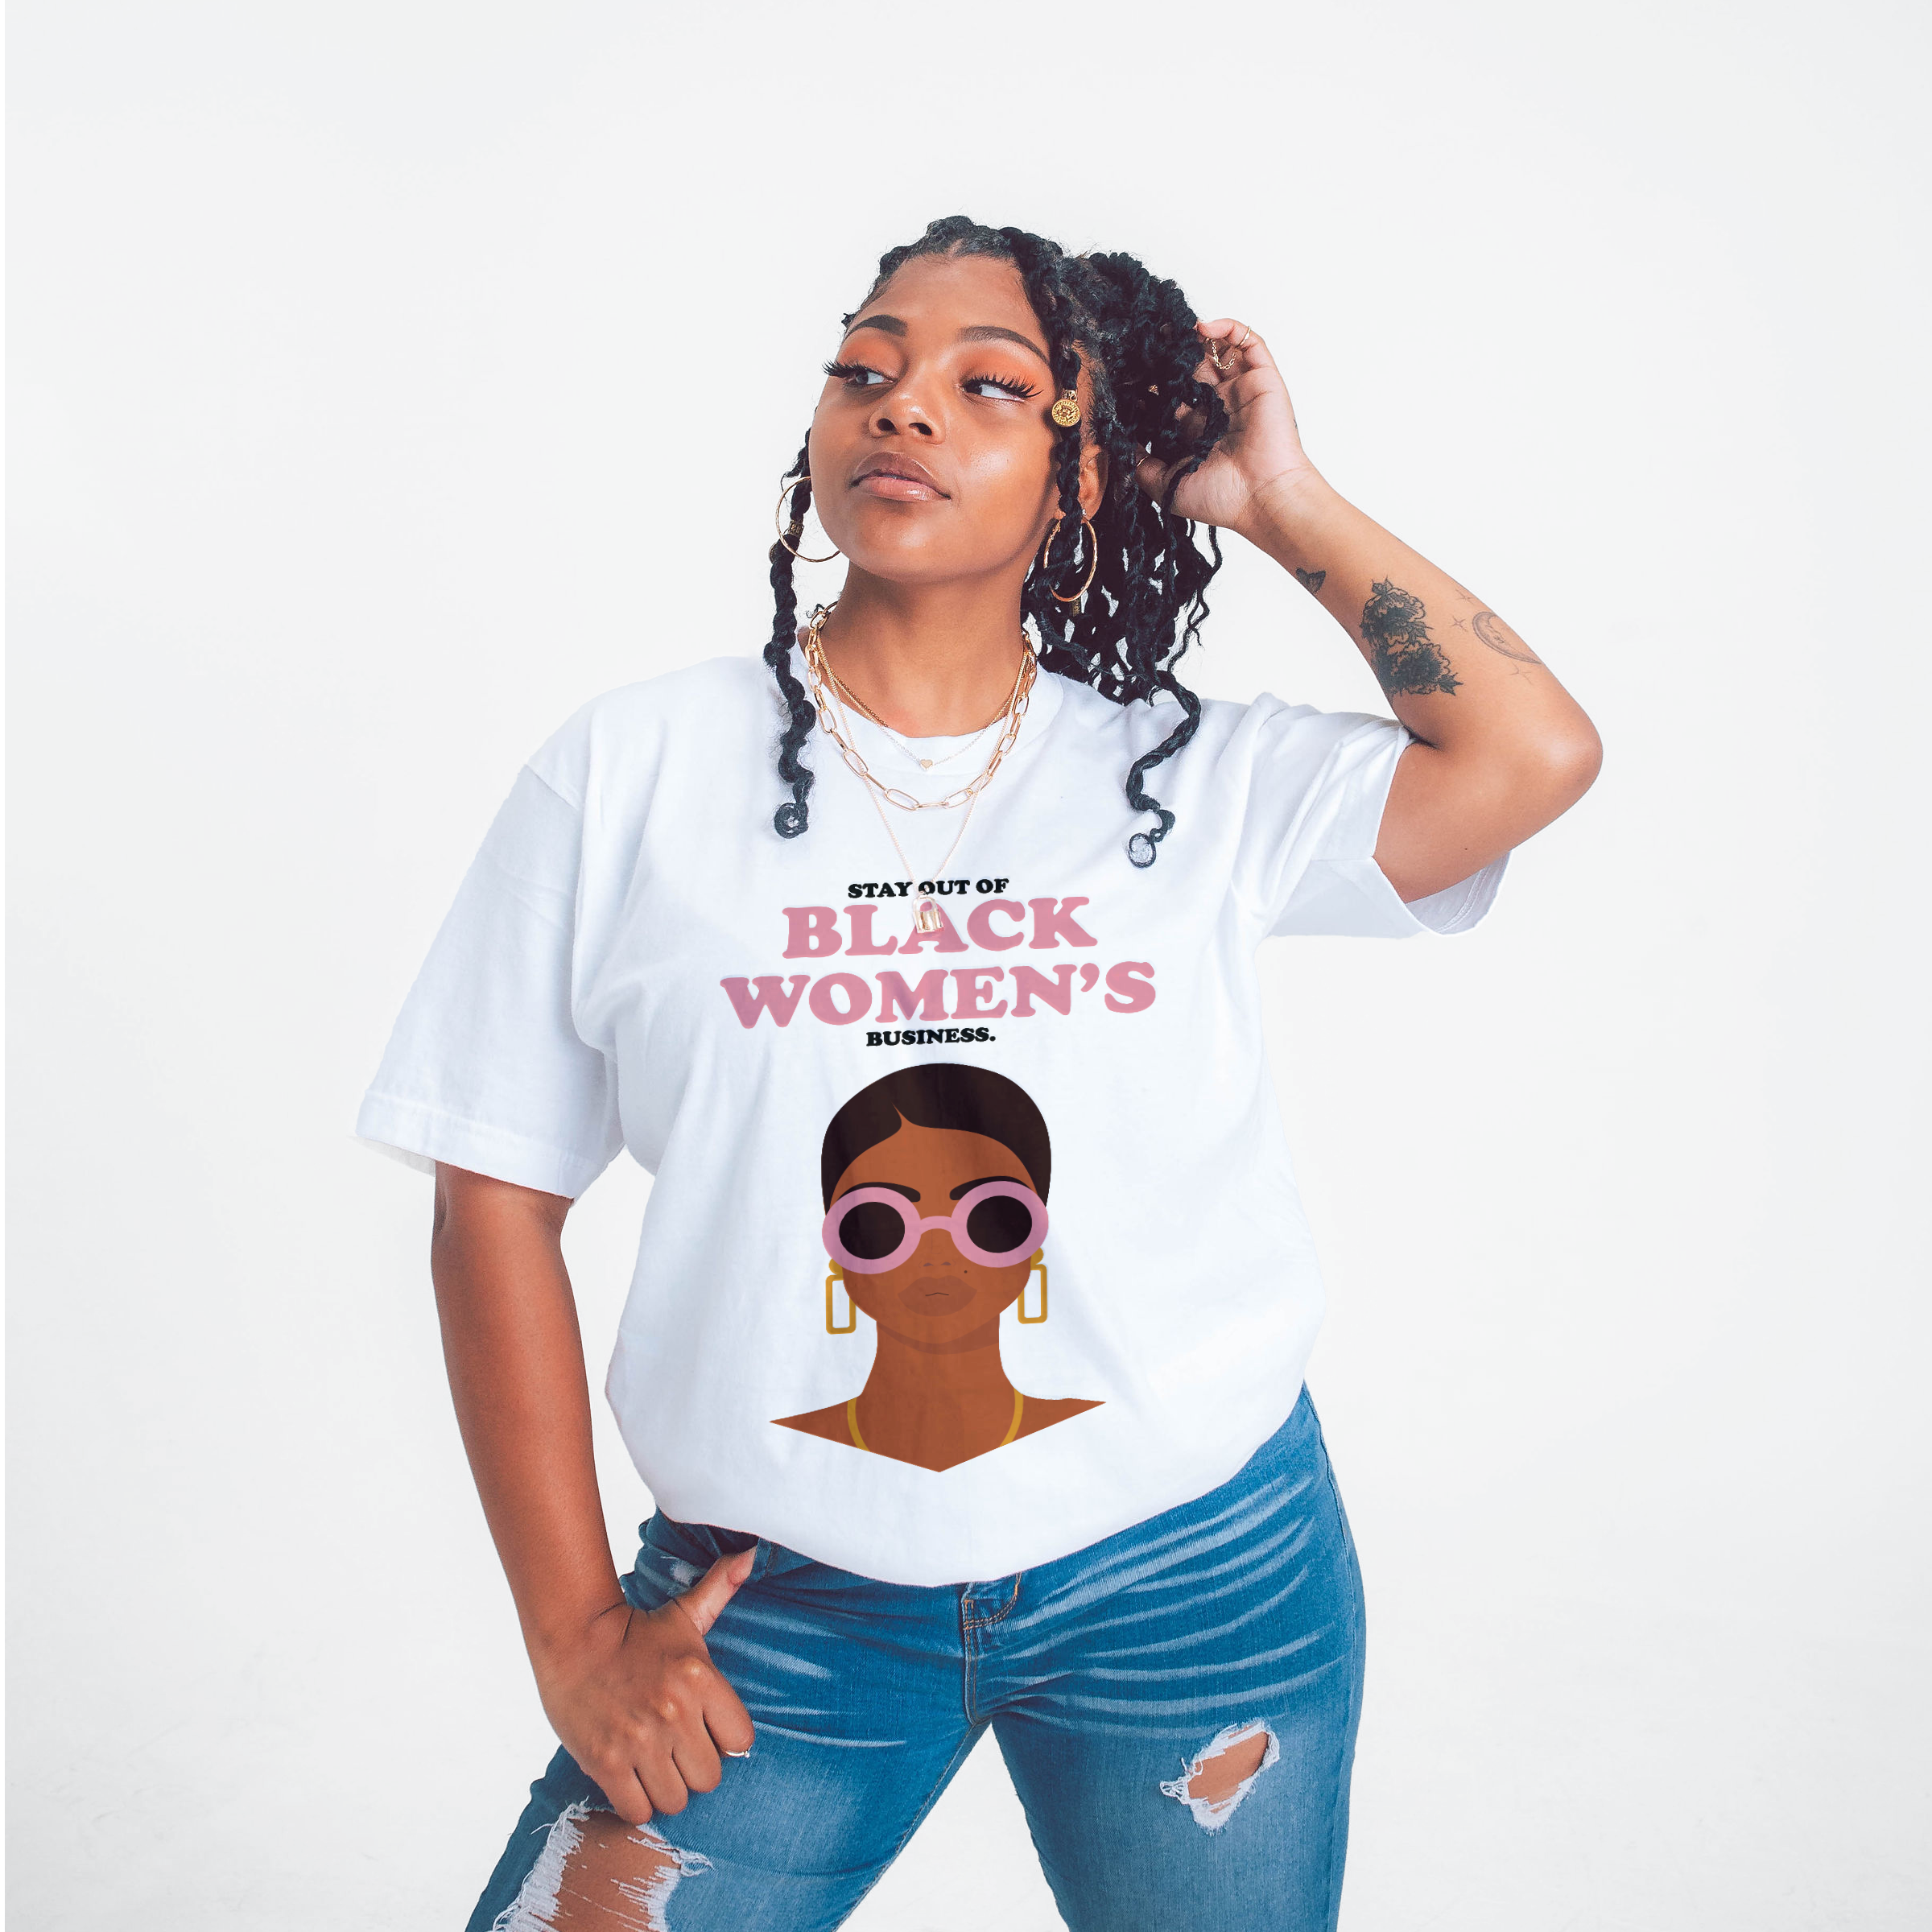 Stay Out Of Black Women's Business Stone | Tee